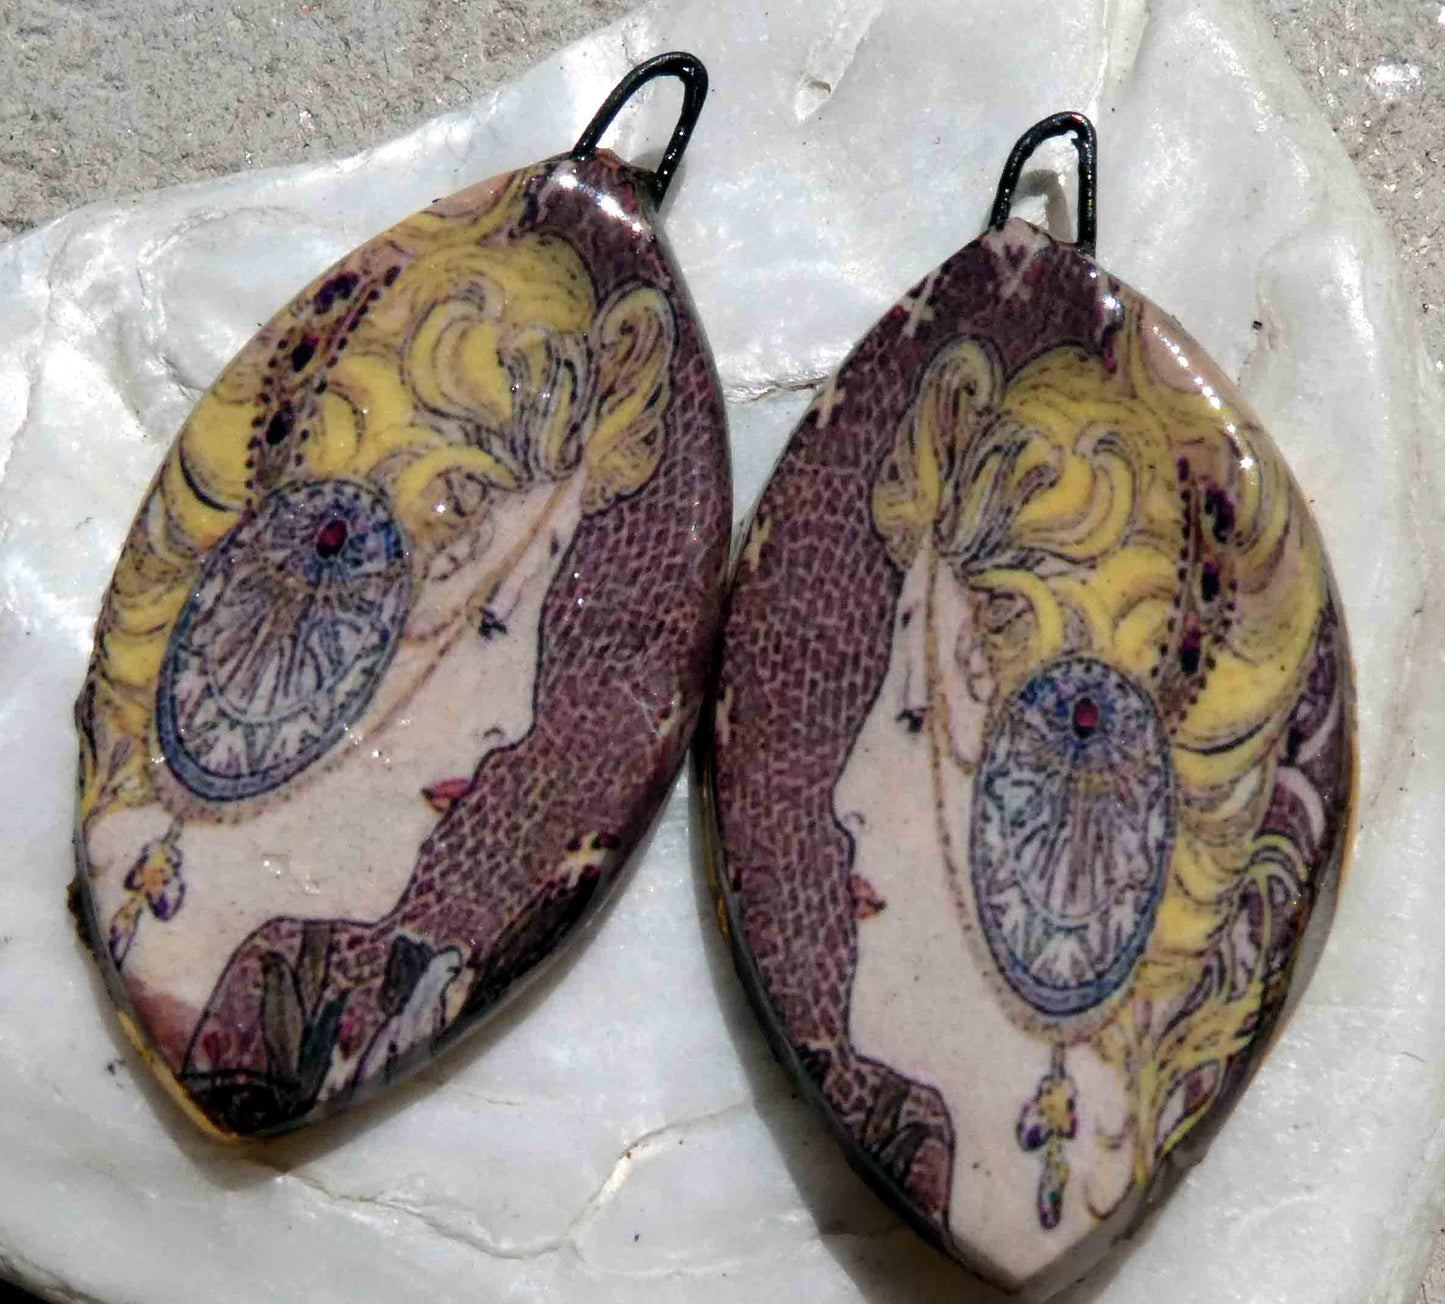 Ceramic Decal Mucha Earring Droppers #31